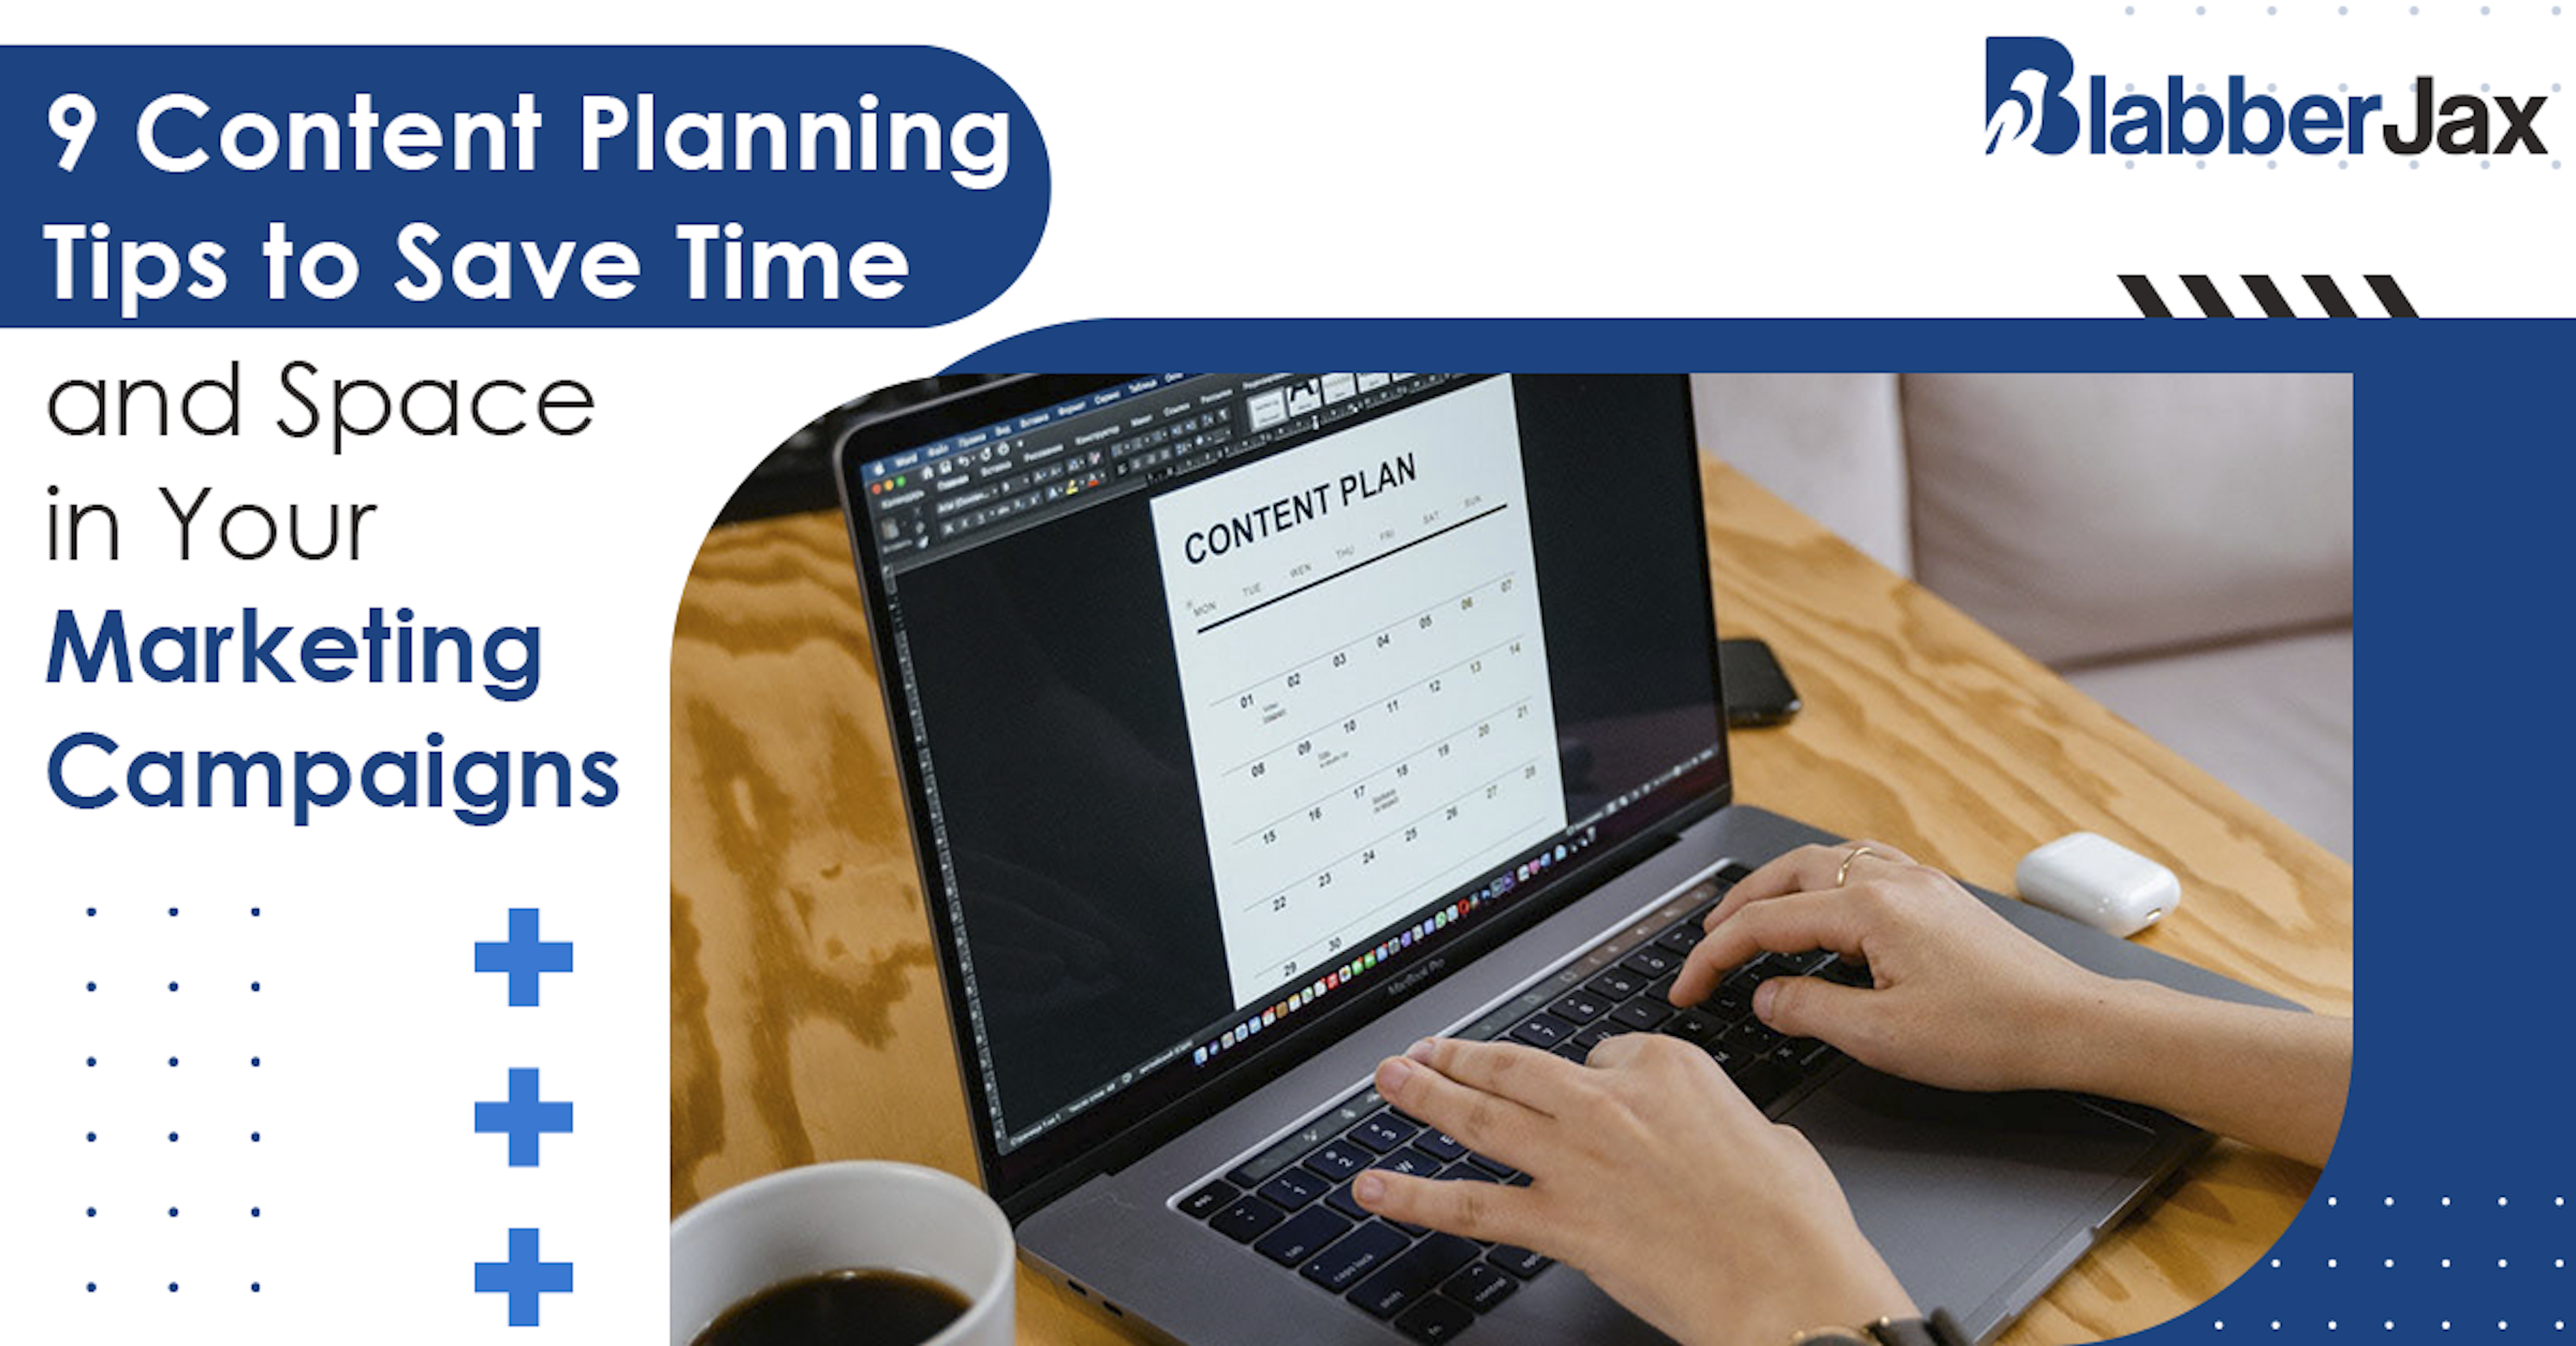 9 Content Planning Tips to Save Time and Space in Your Marketing Campaigns